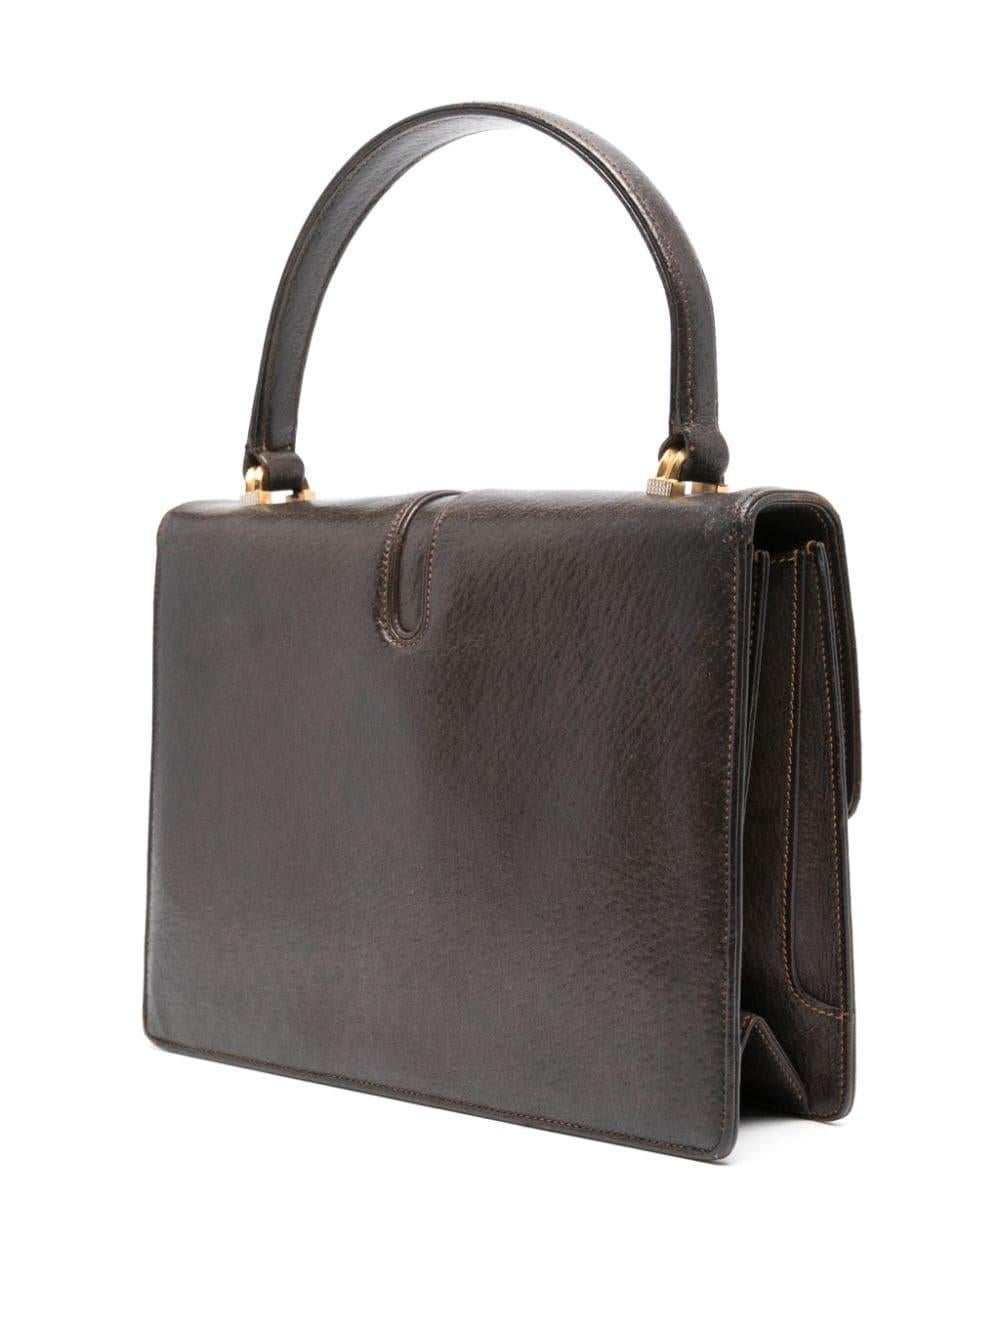 1950s Gucci Brown Leather Handbag In Good Condition For Sale In Paris, FR